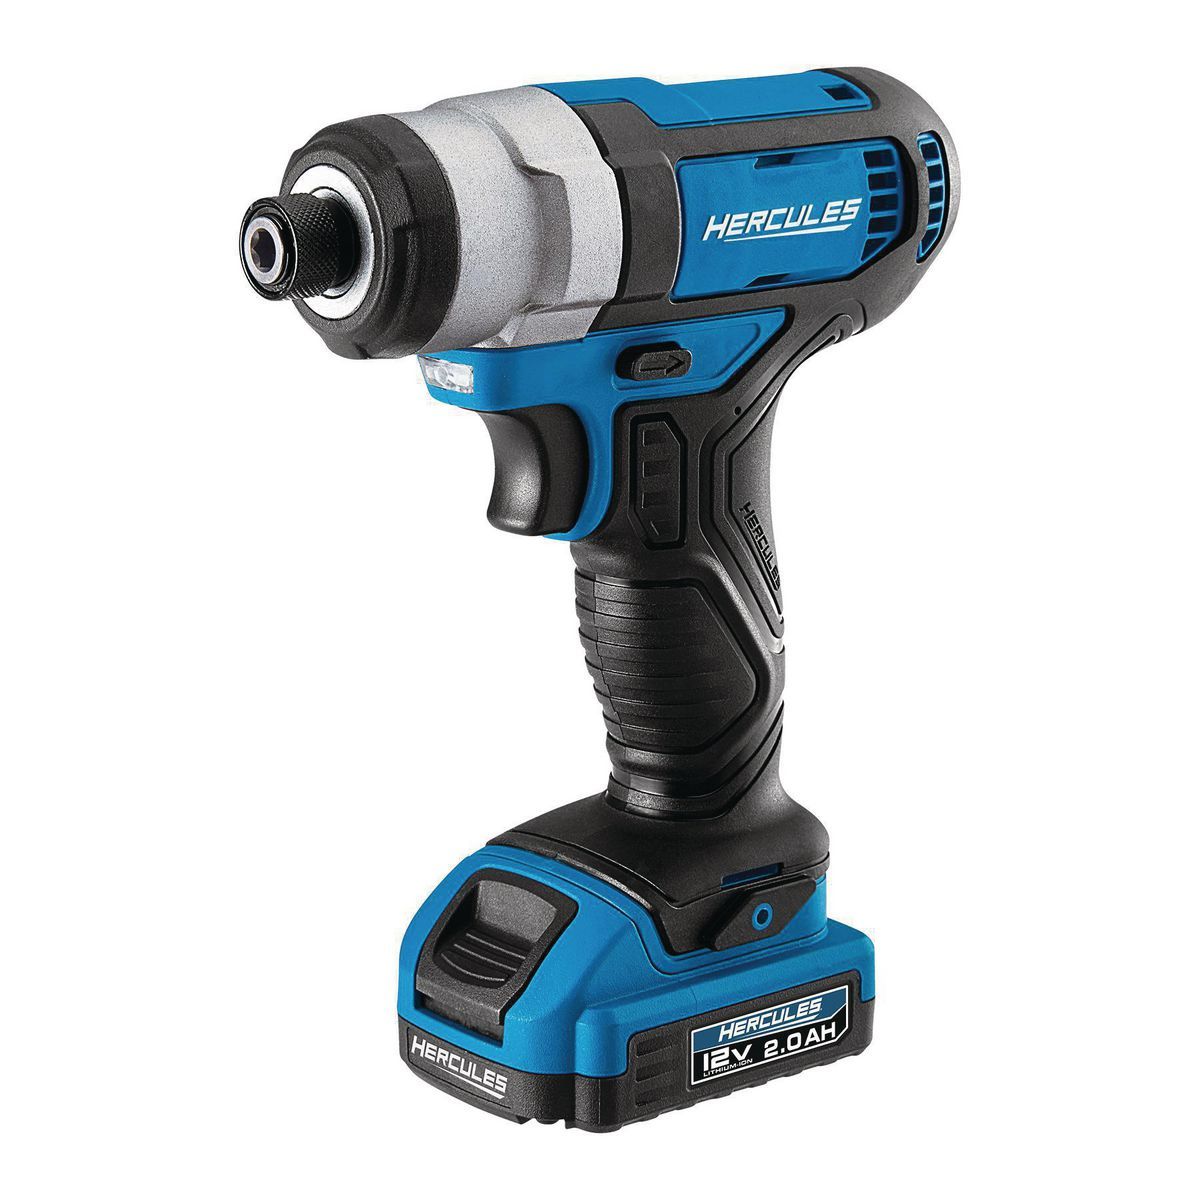 HERCULES 12V Cordless 1/4 in. Hex Compact Impact Driver - Tool Only